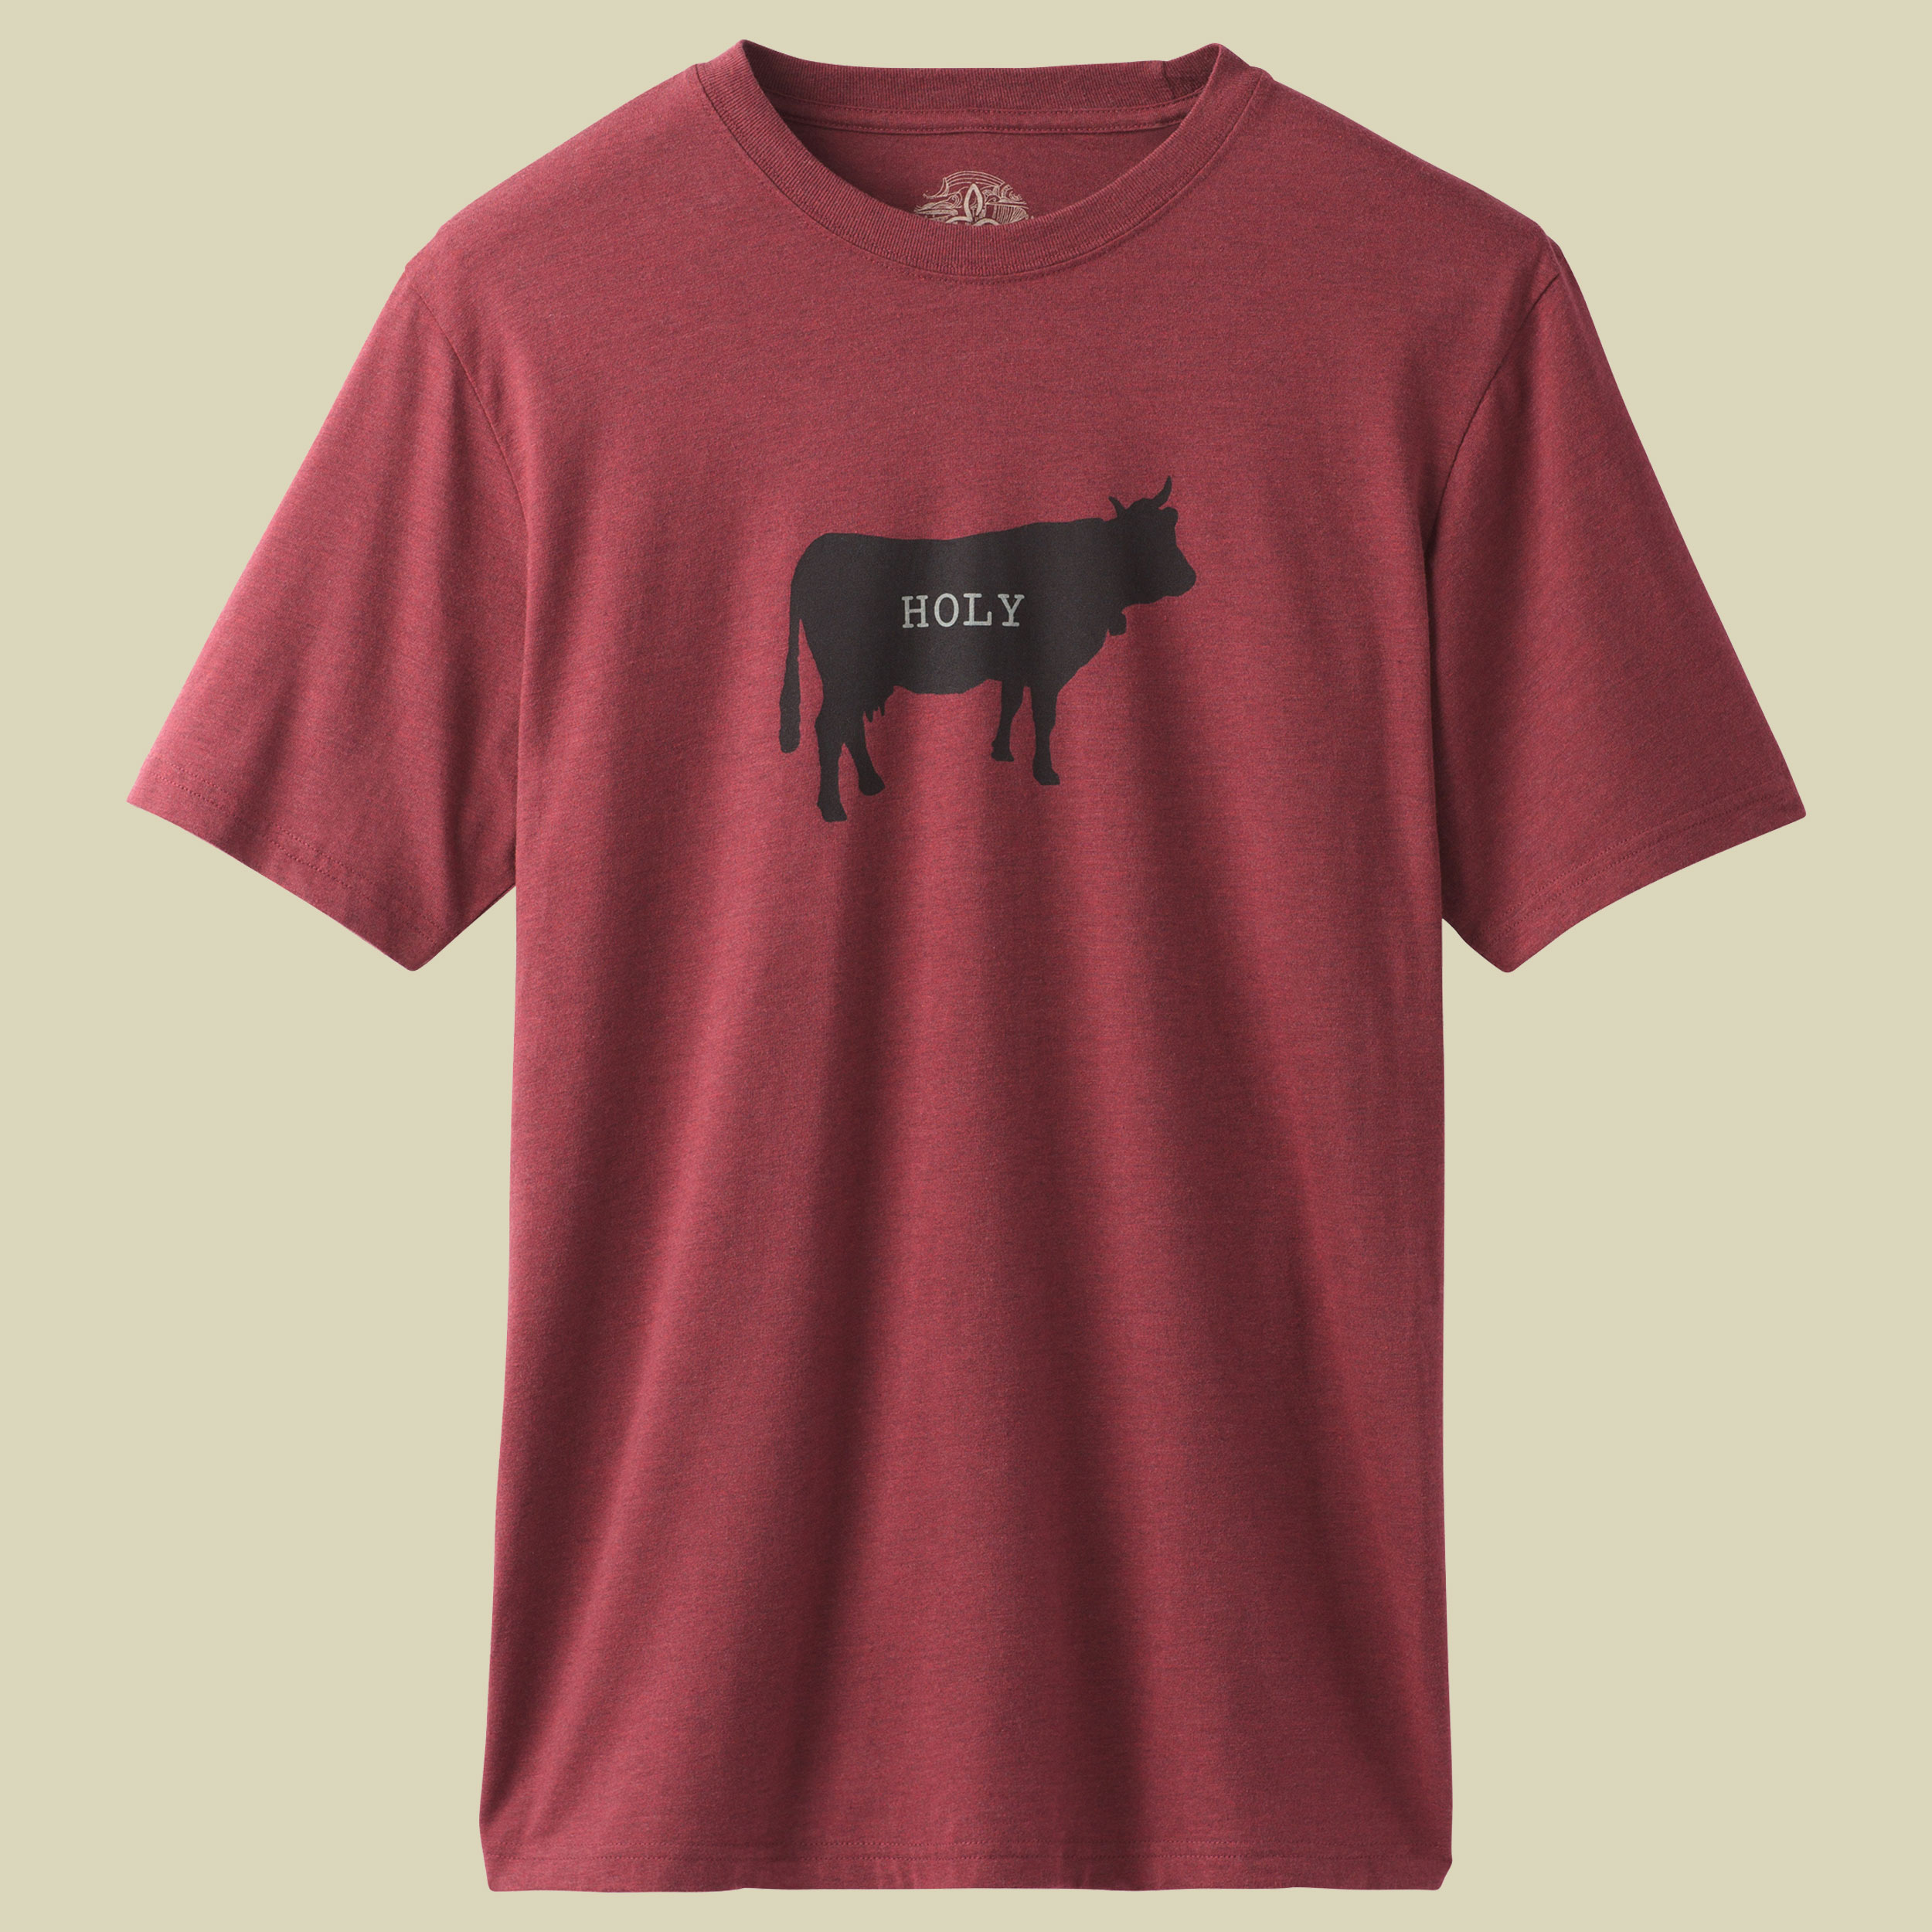 Holy Cow Journeyman T-Shirt Men Größe XL Farbe rusted roof heather